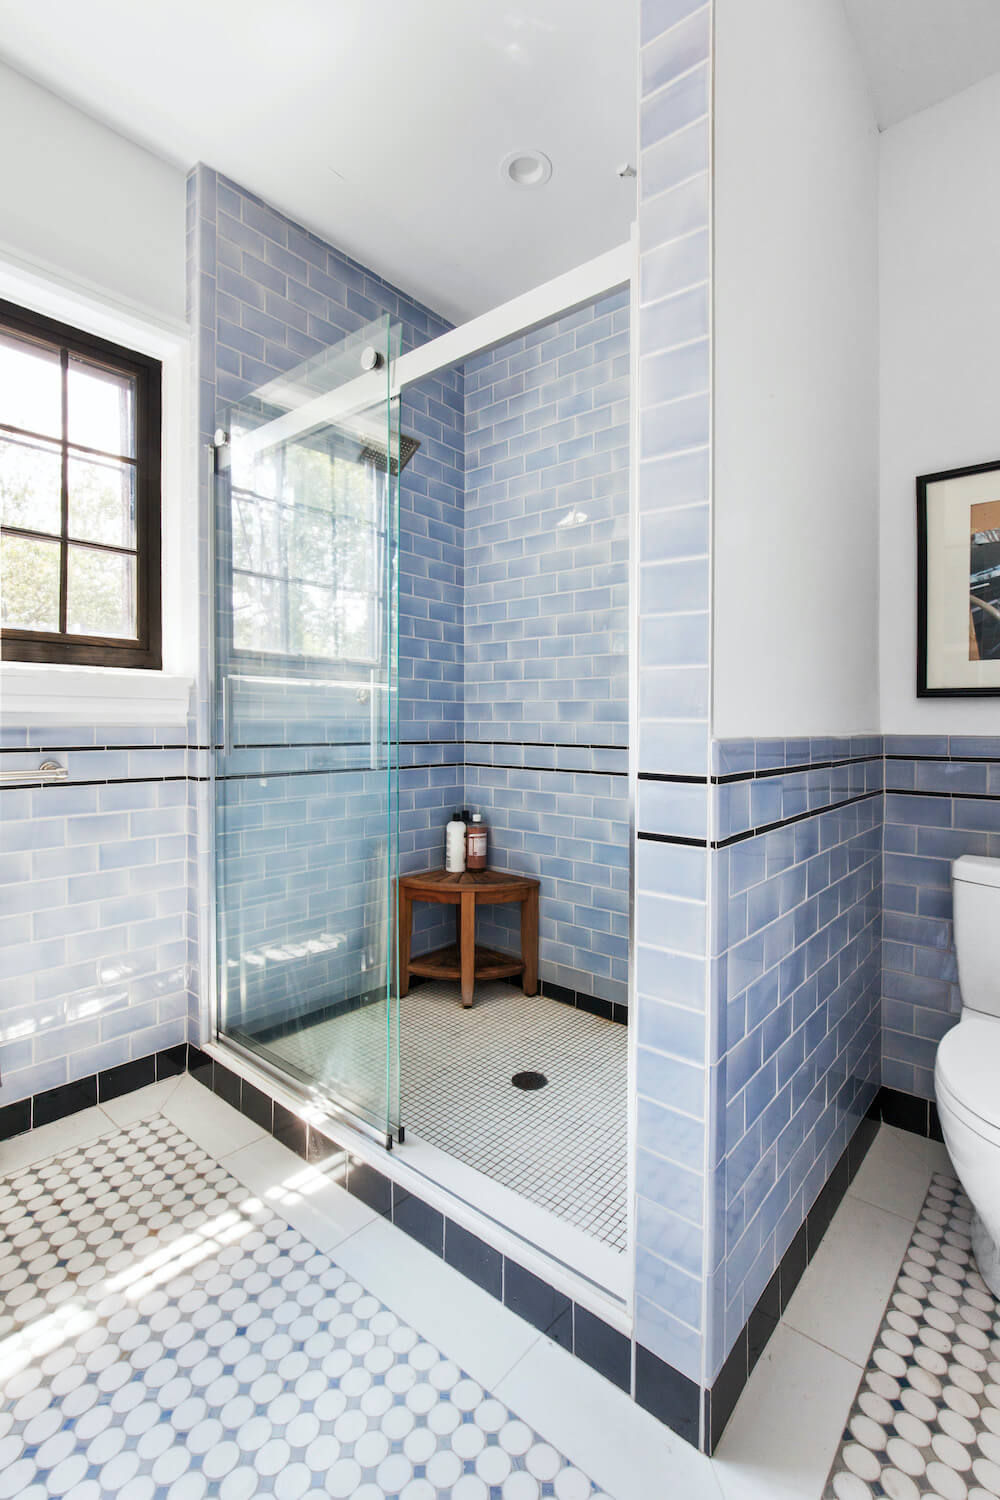 Shower area separated by glass doors in a white and blue bathroom with blue half tiles after renovation